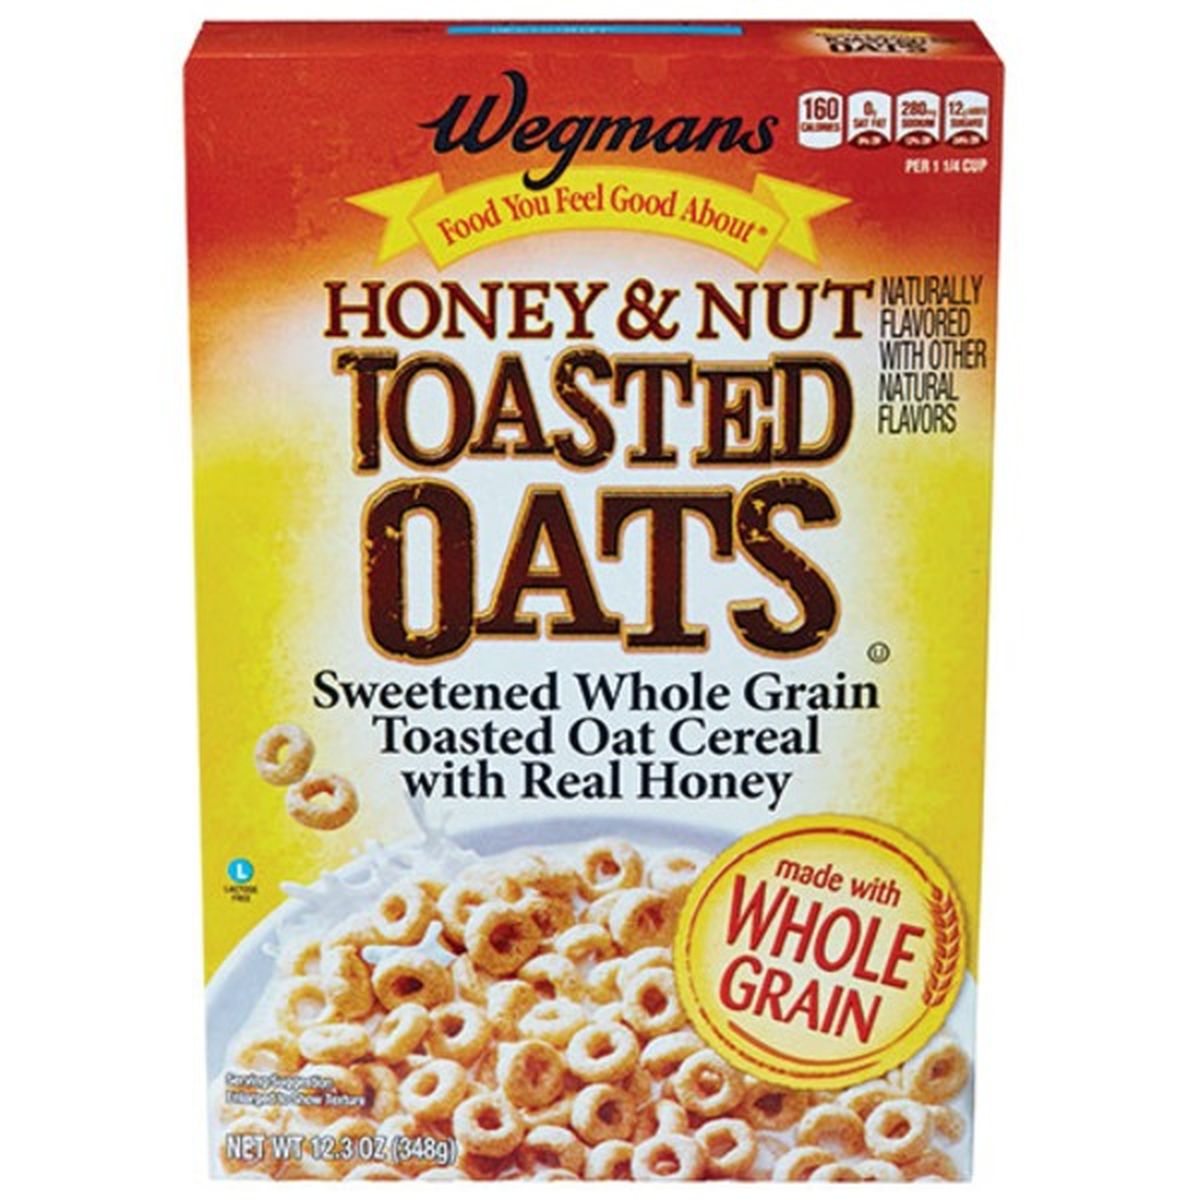 Calories in Wegmans Honey & Nut Toasted Oats Cereal